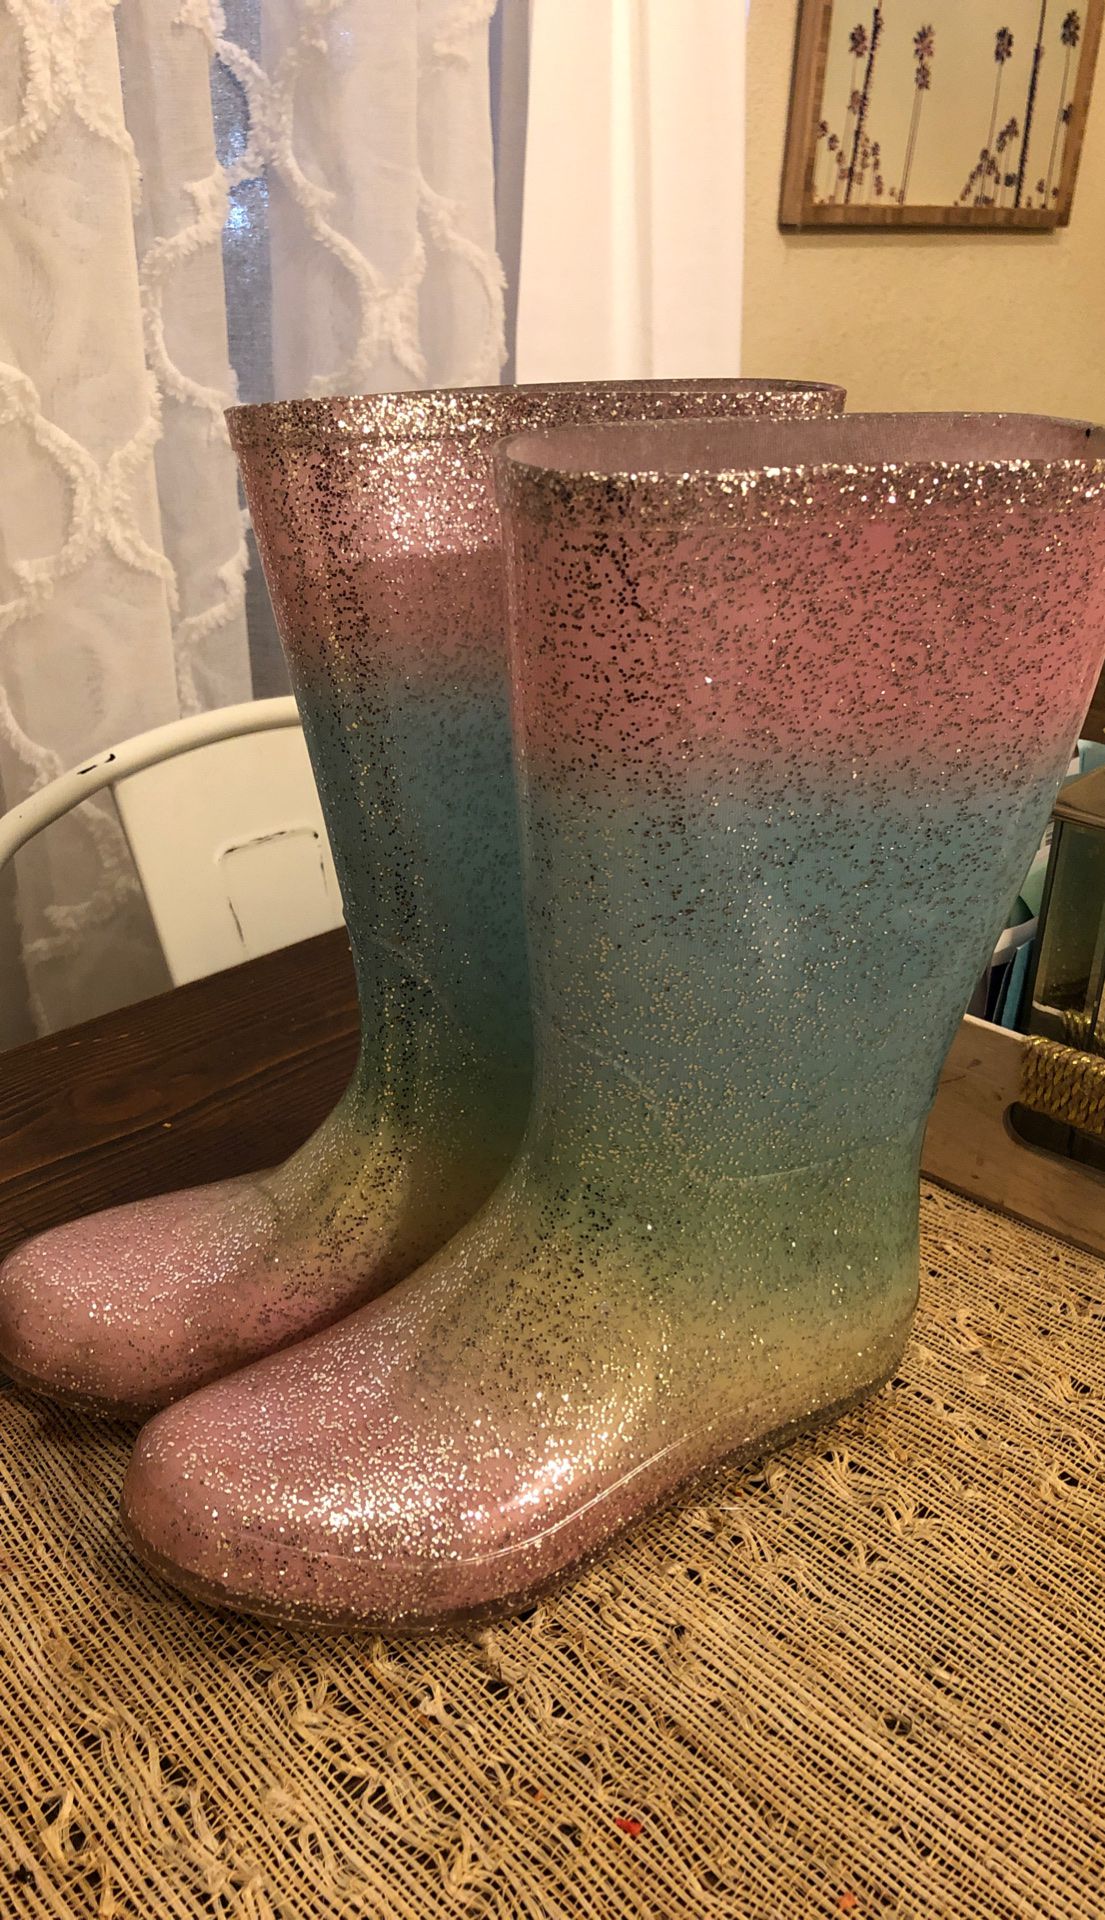 Girls size 3 rain boots pretty much new worn couple times